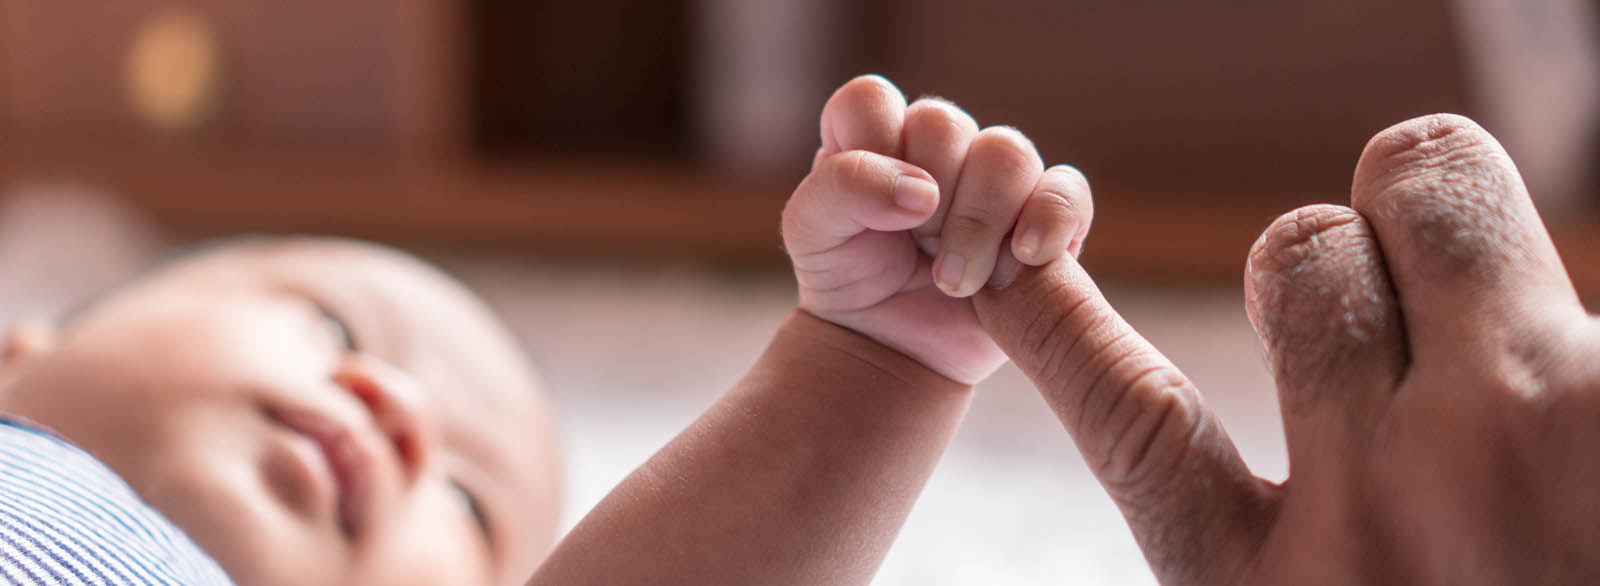 Infant boy whose hand is grasping the pinky finger of an adult.